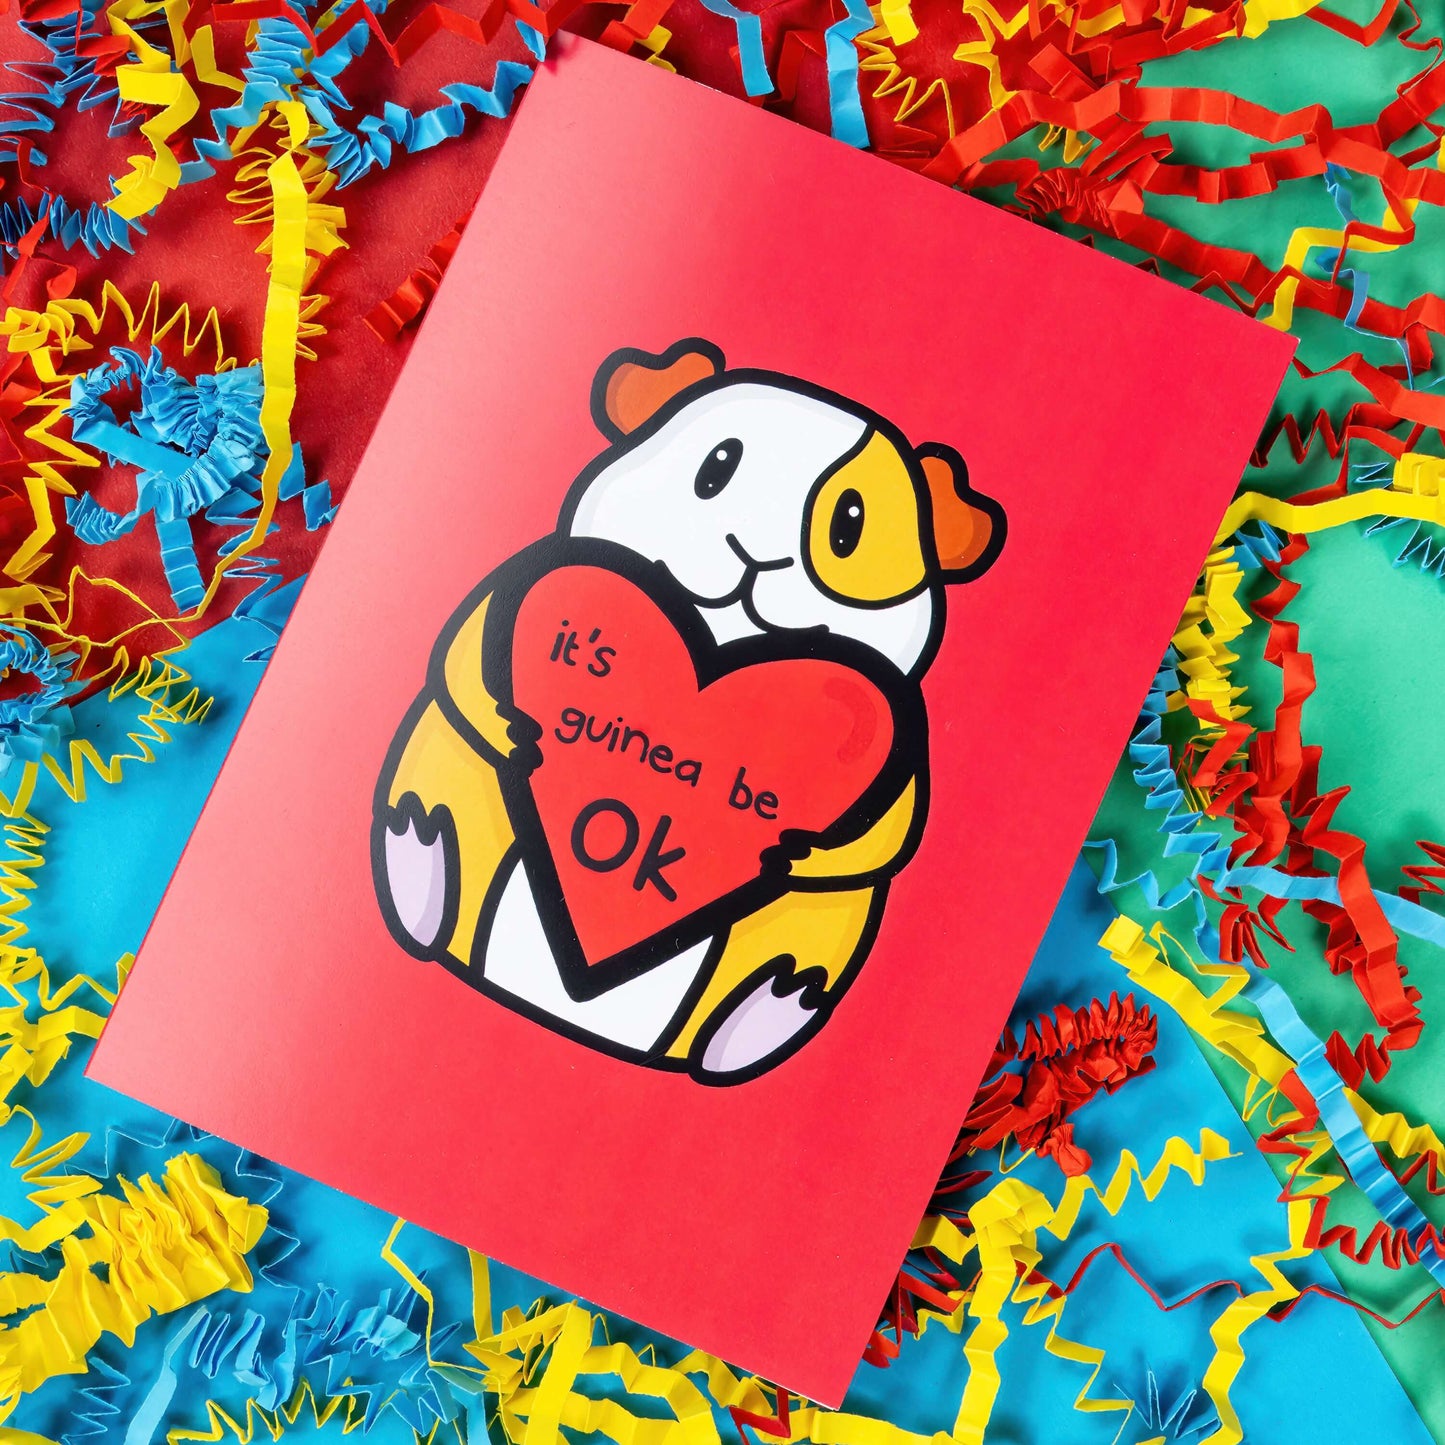 The It's Gonna Be OK Guinea Pig Card on a red, blue and green background with yellow, blue and red crinkle card confetti. The red a6 greeting card features a smiling orange and white guinea pig sat down holding a red heart with black text reading 'it's guinea be ok'. The hand drawn design is a perfect send a hug card as a gentle positive reminder.